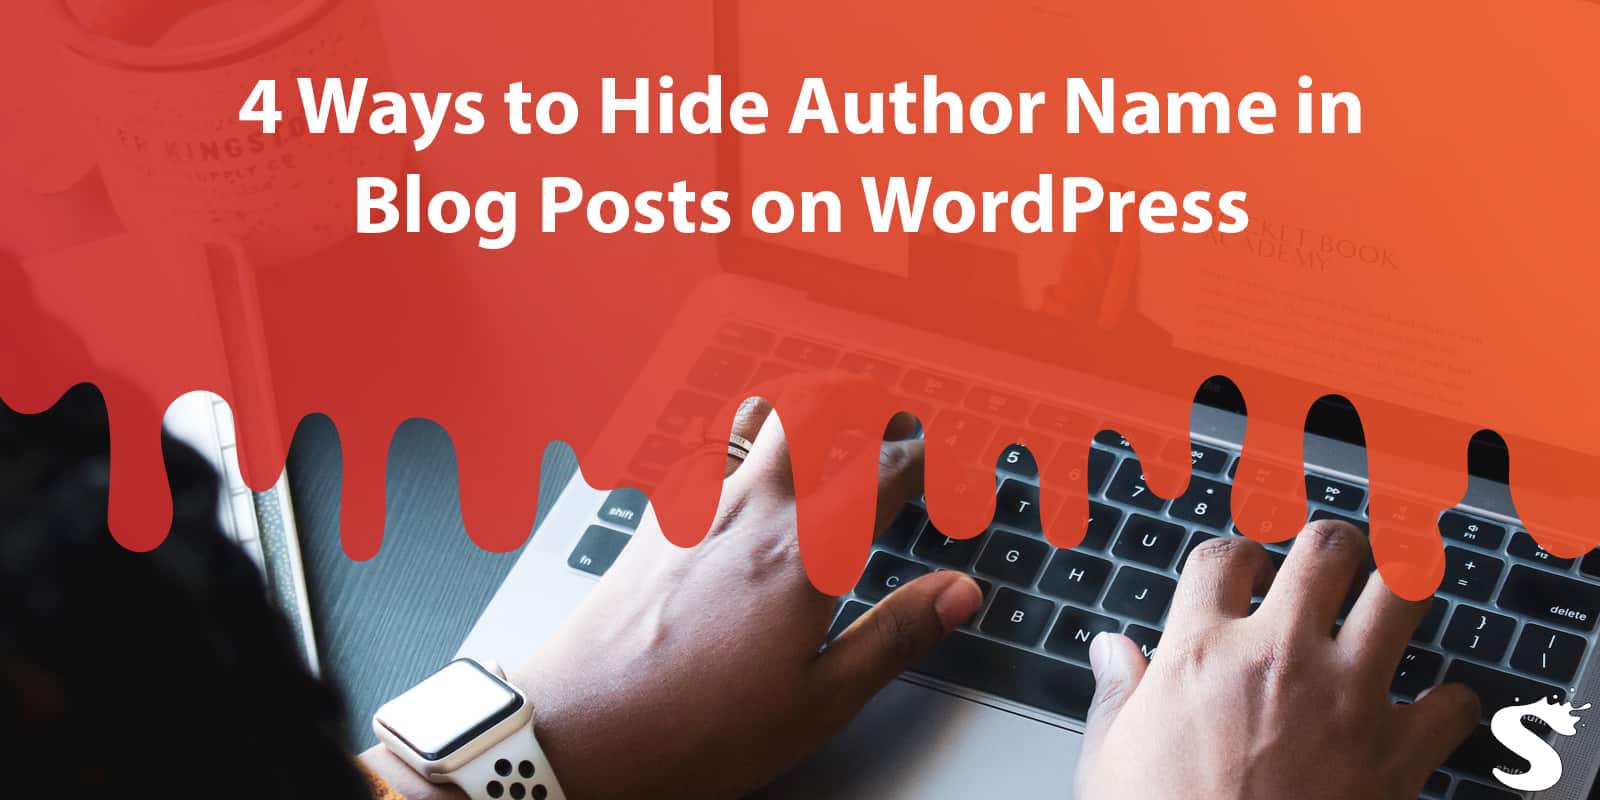 4 Ways to Hide Author Name in Blog Posts on WordPress